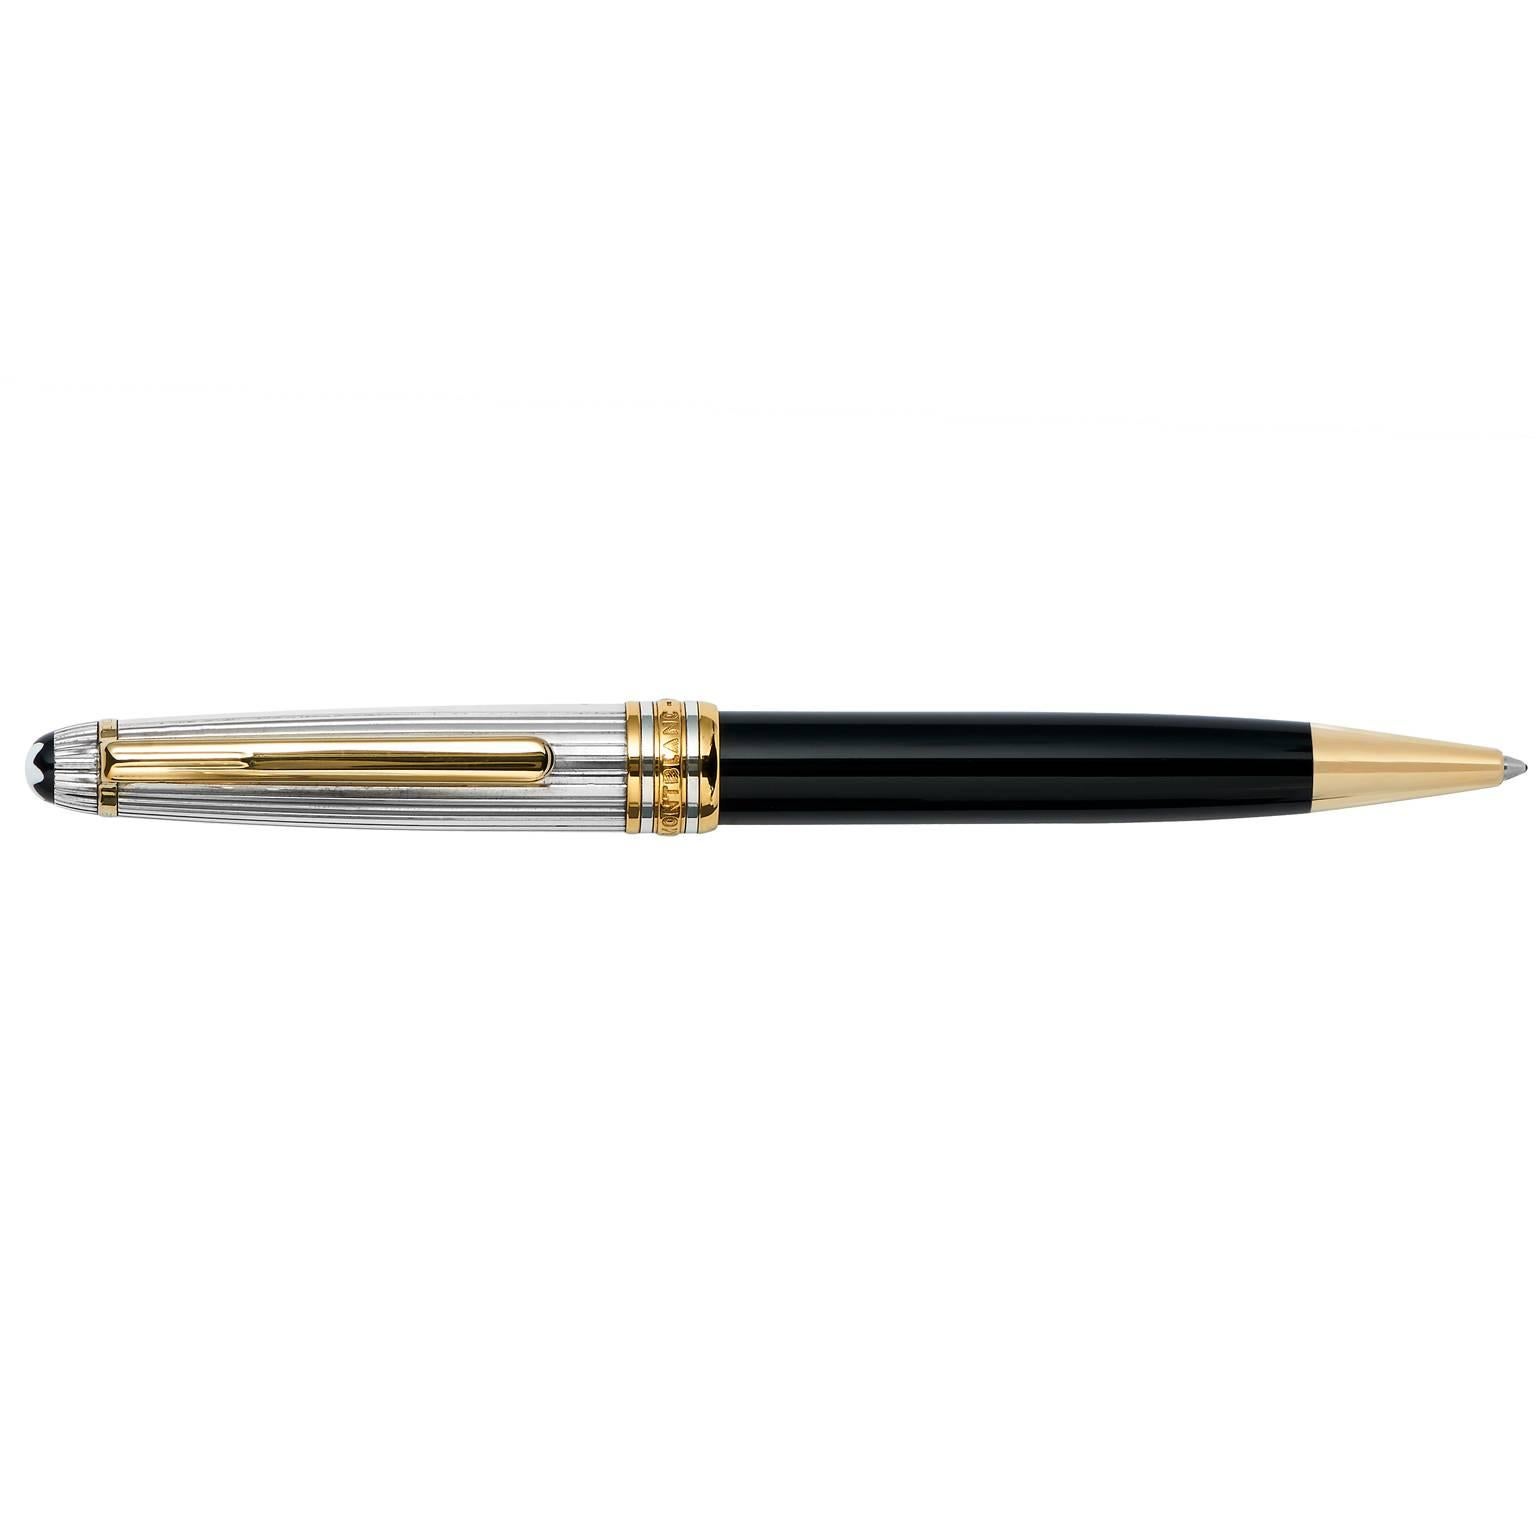 The Mont Blanc brand is synonymous with corporate luxury. This Mont Blanc solitaire doue ballpoint pen is gold plated and features a sterling silver and black resin. New Retail Price: $620. Our Price: $496. 